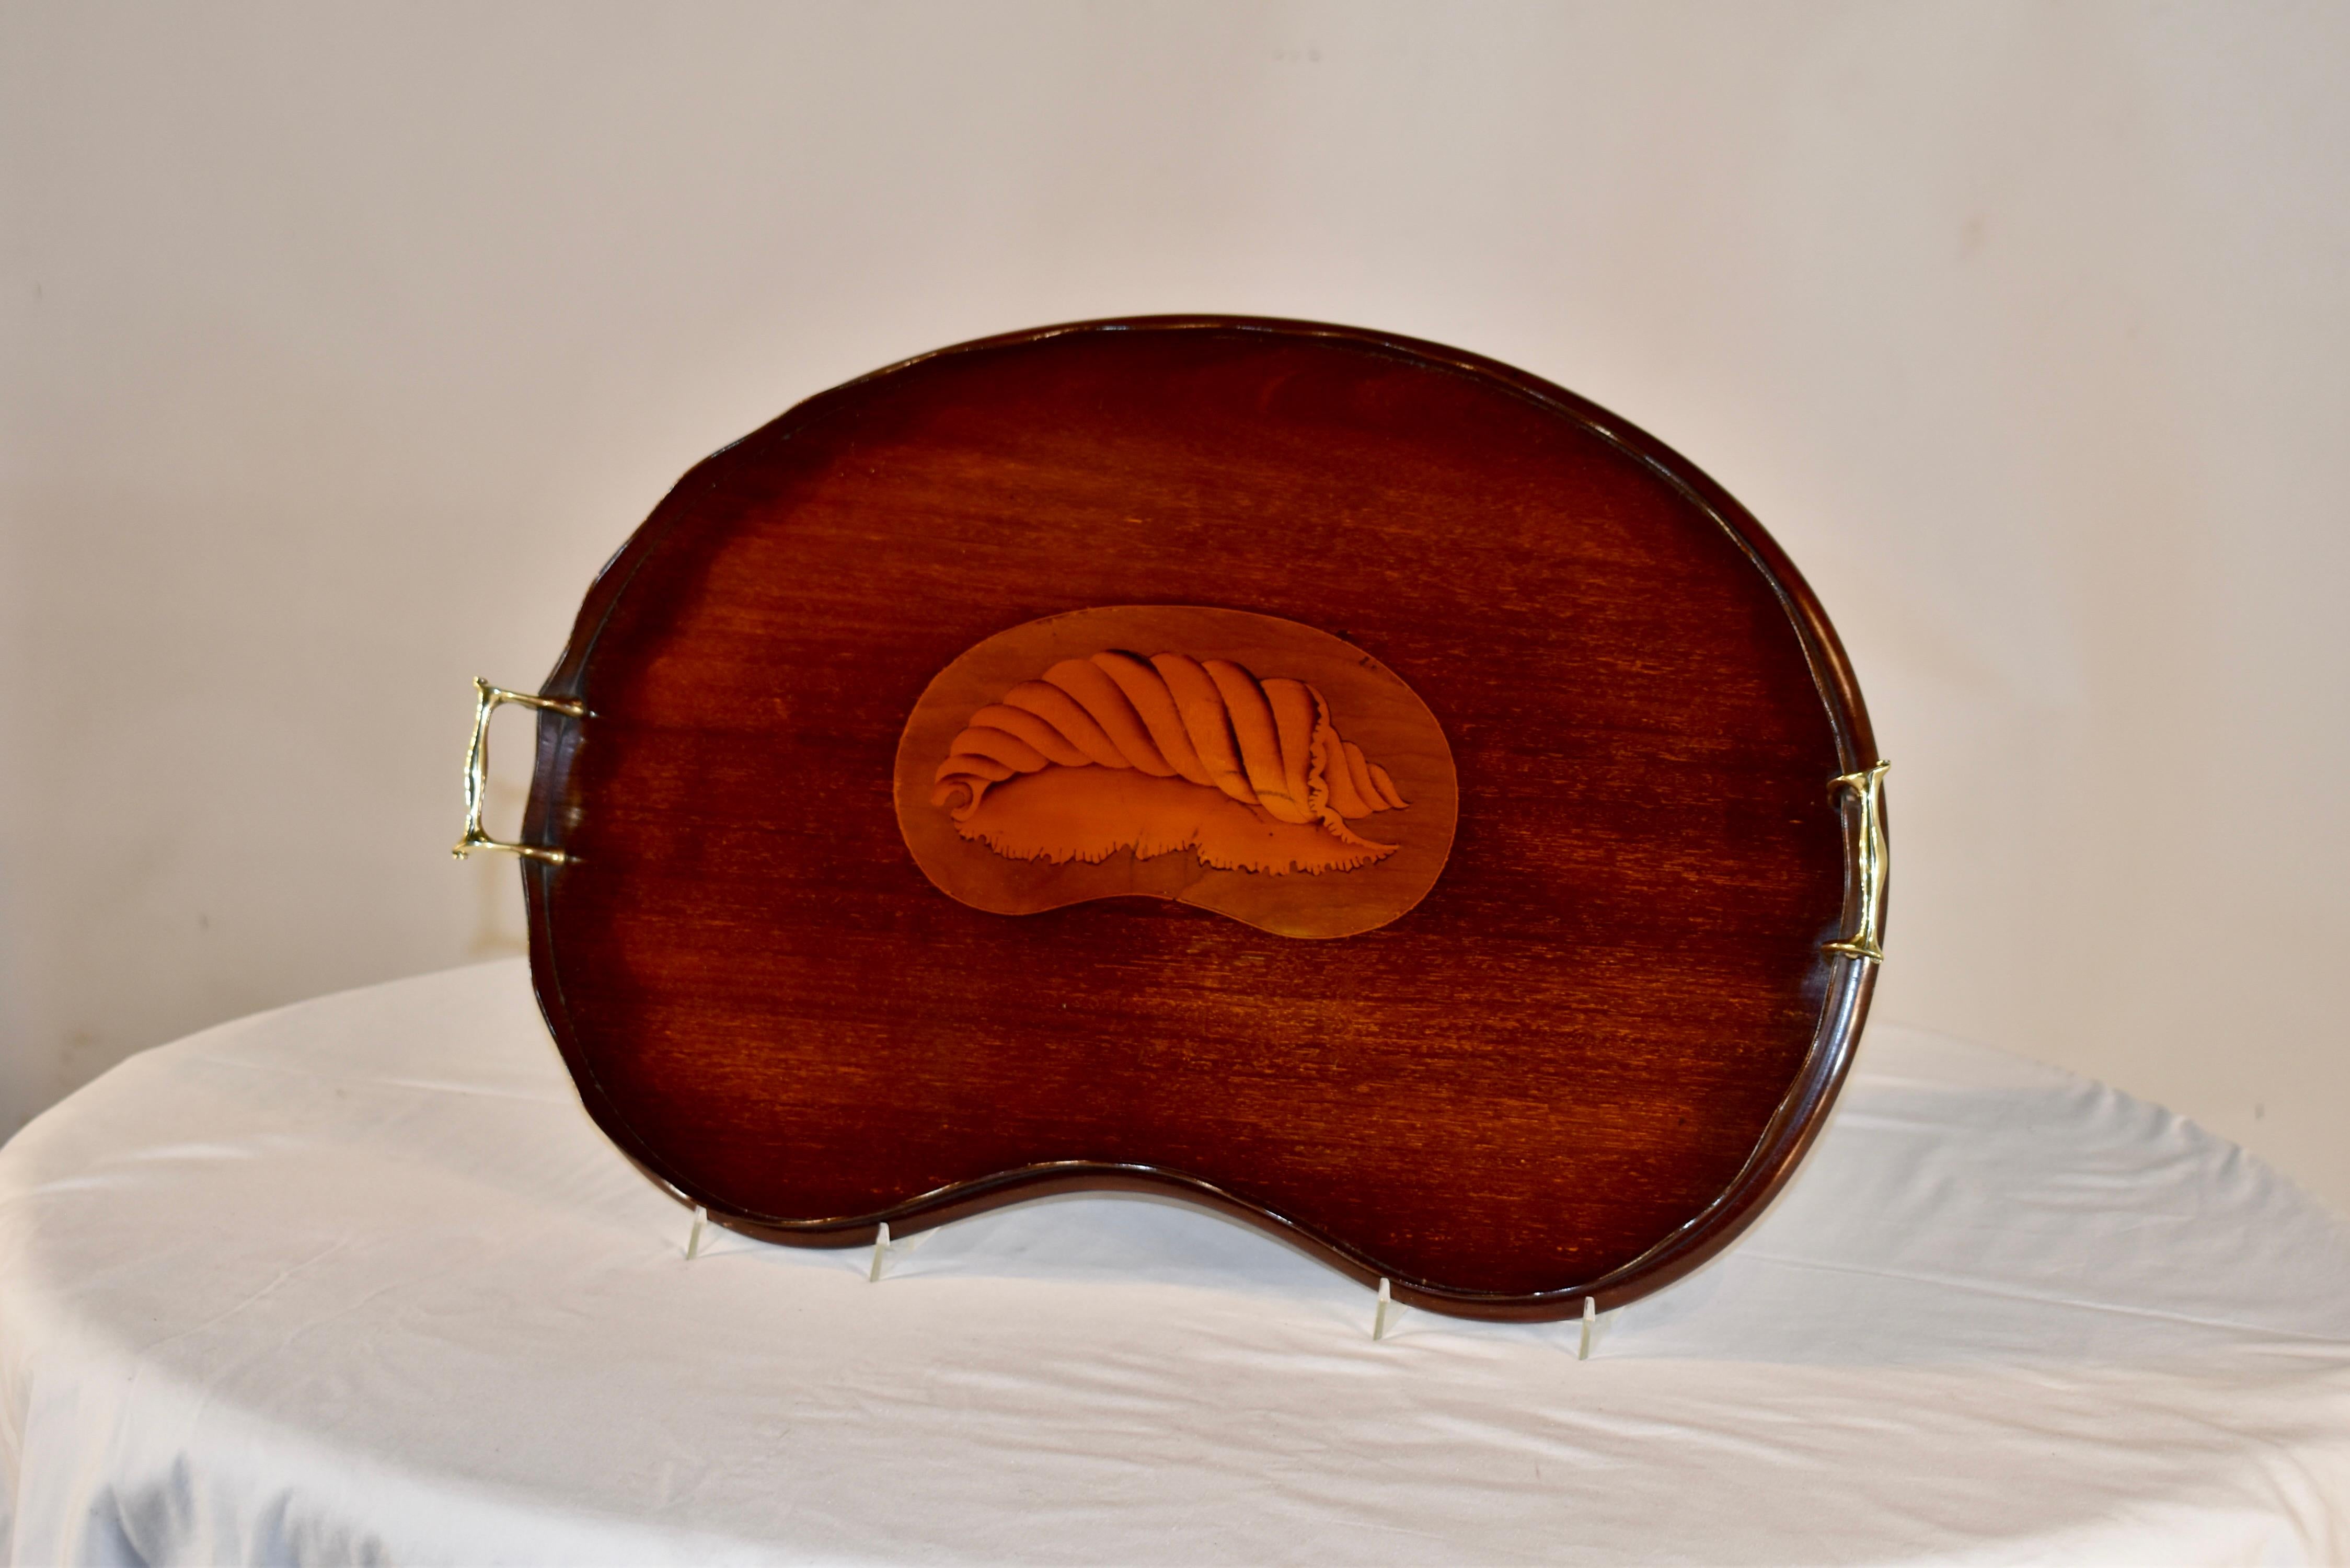 19th century mahogany tray from England with a lovely kidney shape. The tray is surrounded by a hand scalloped gallery and hand cast brass handles. In the center of the tray is an inlaid medallion with a wonderfully detailed shell in the center.